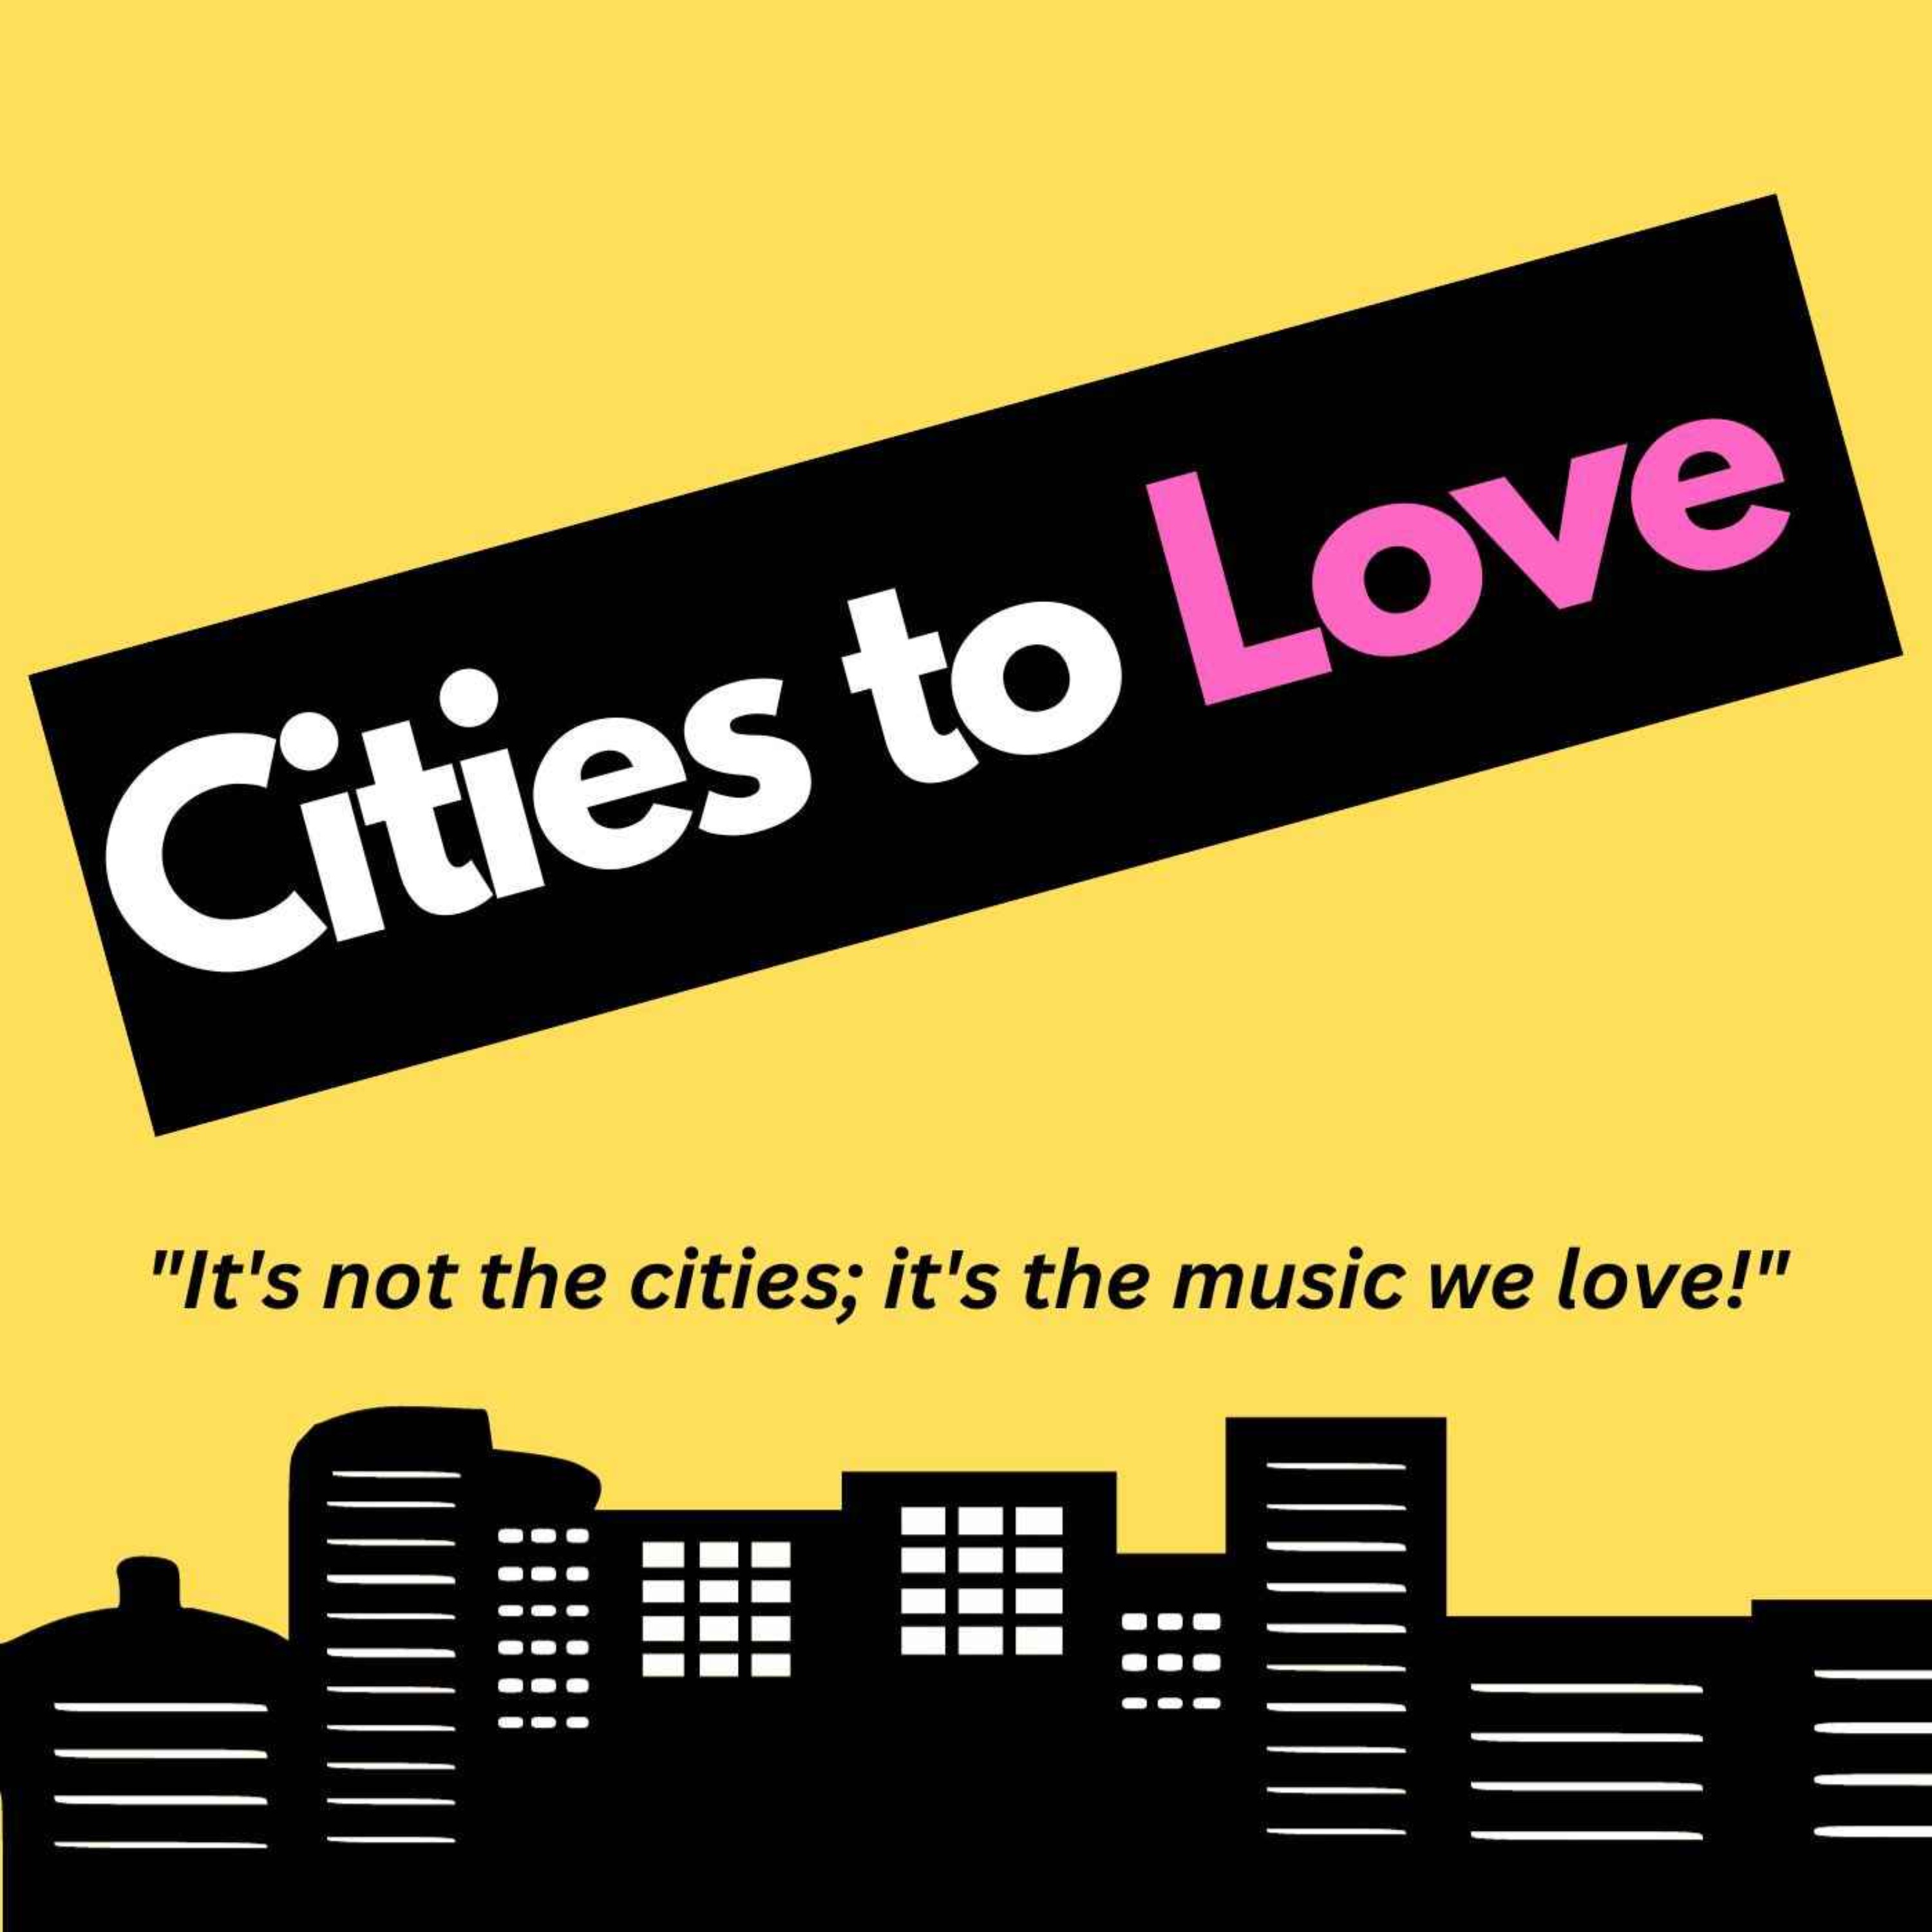 Cities to Love